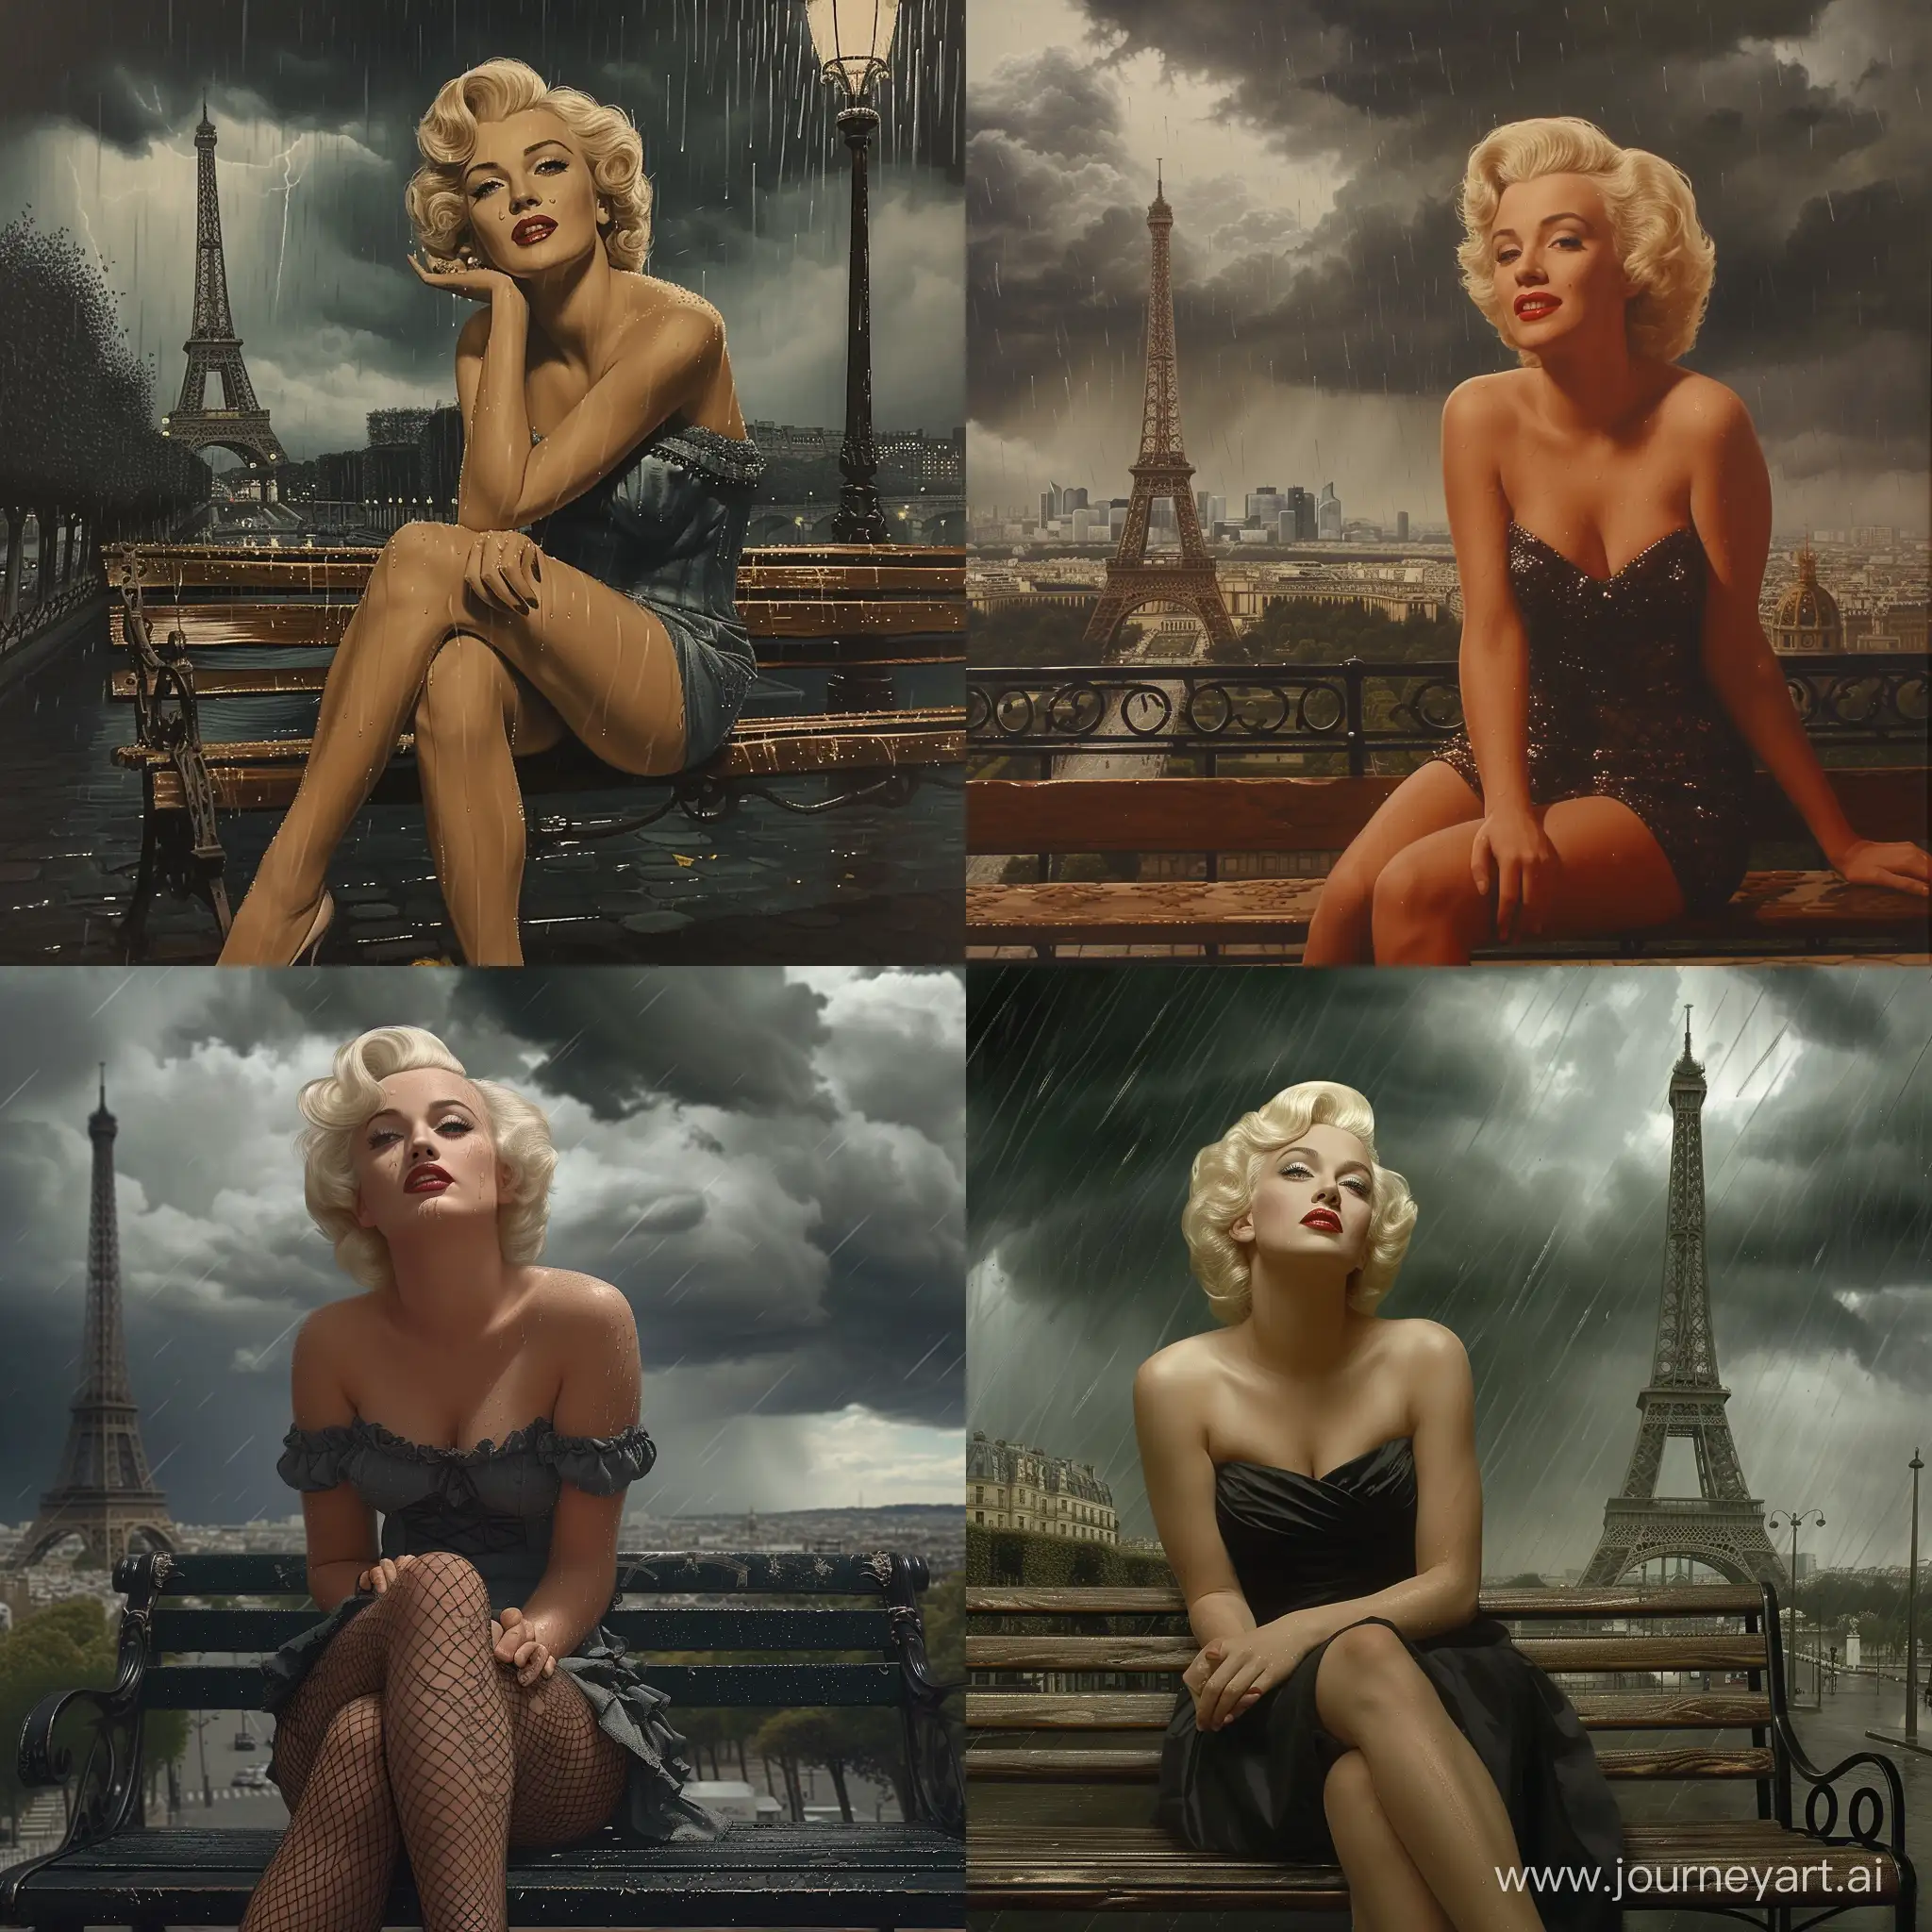 Marilyn-Monroe-Contemplating-Elegance-on-a-Parisian-Bench-During-a-Stormy-Day